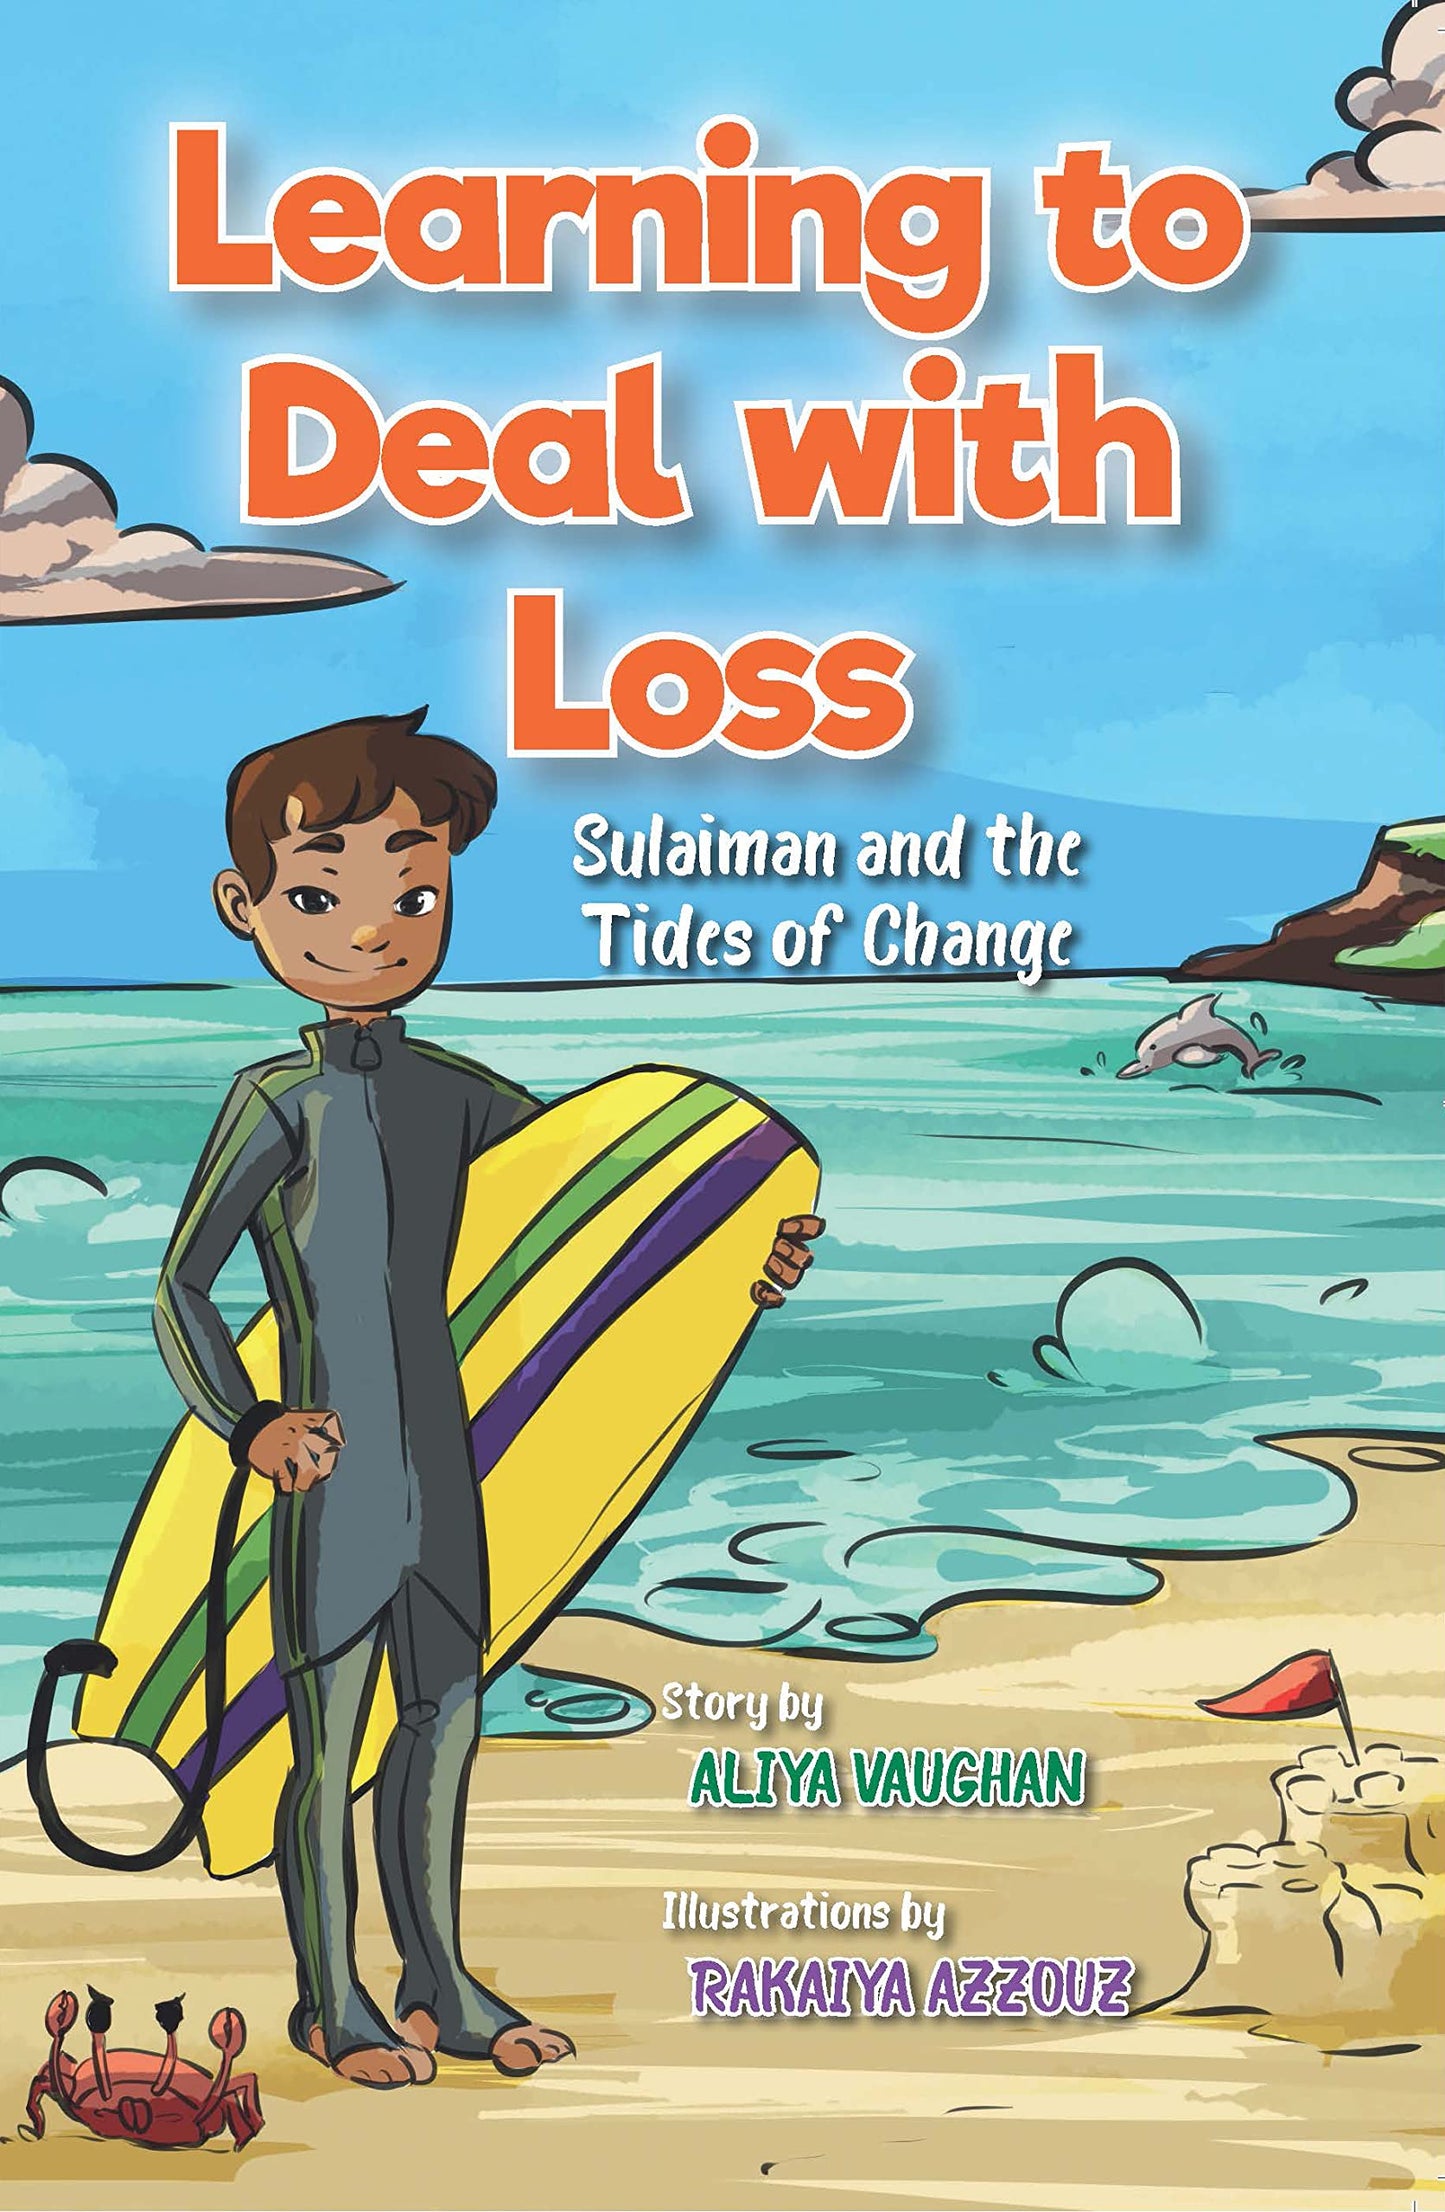 Learning to Deal with Loss: Sulaiman and the Tides of Change by: Aliya Vaughan